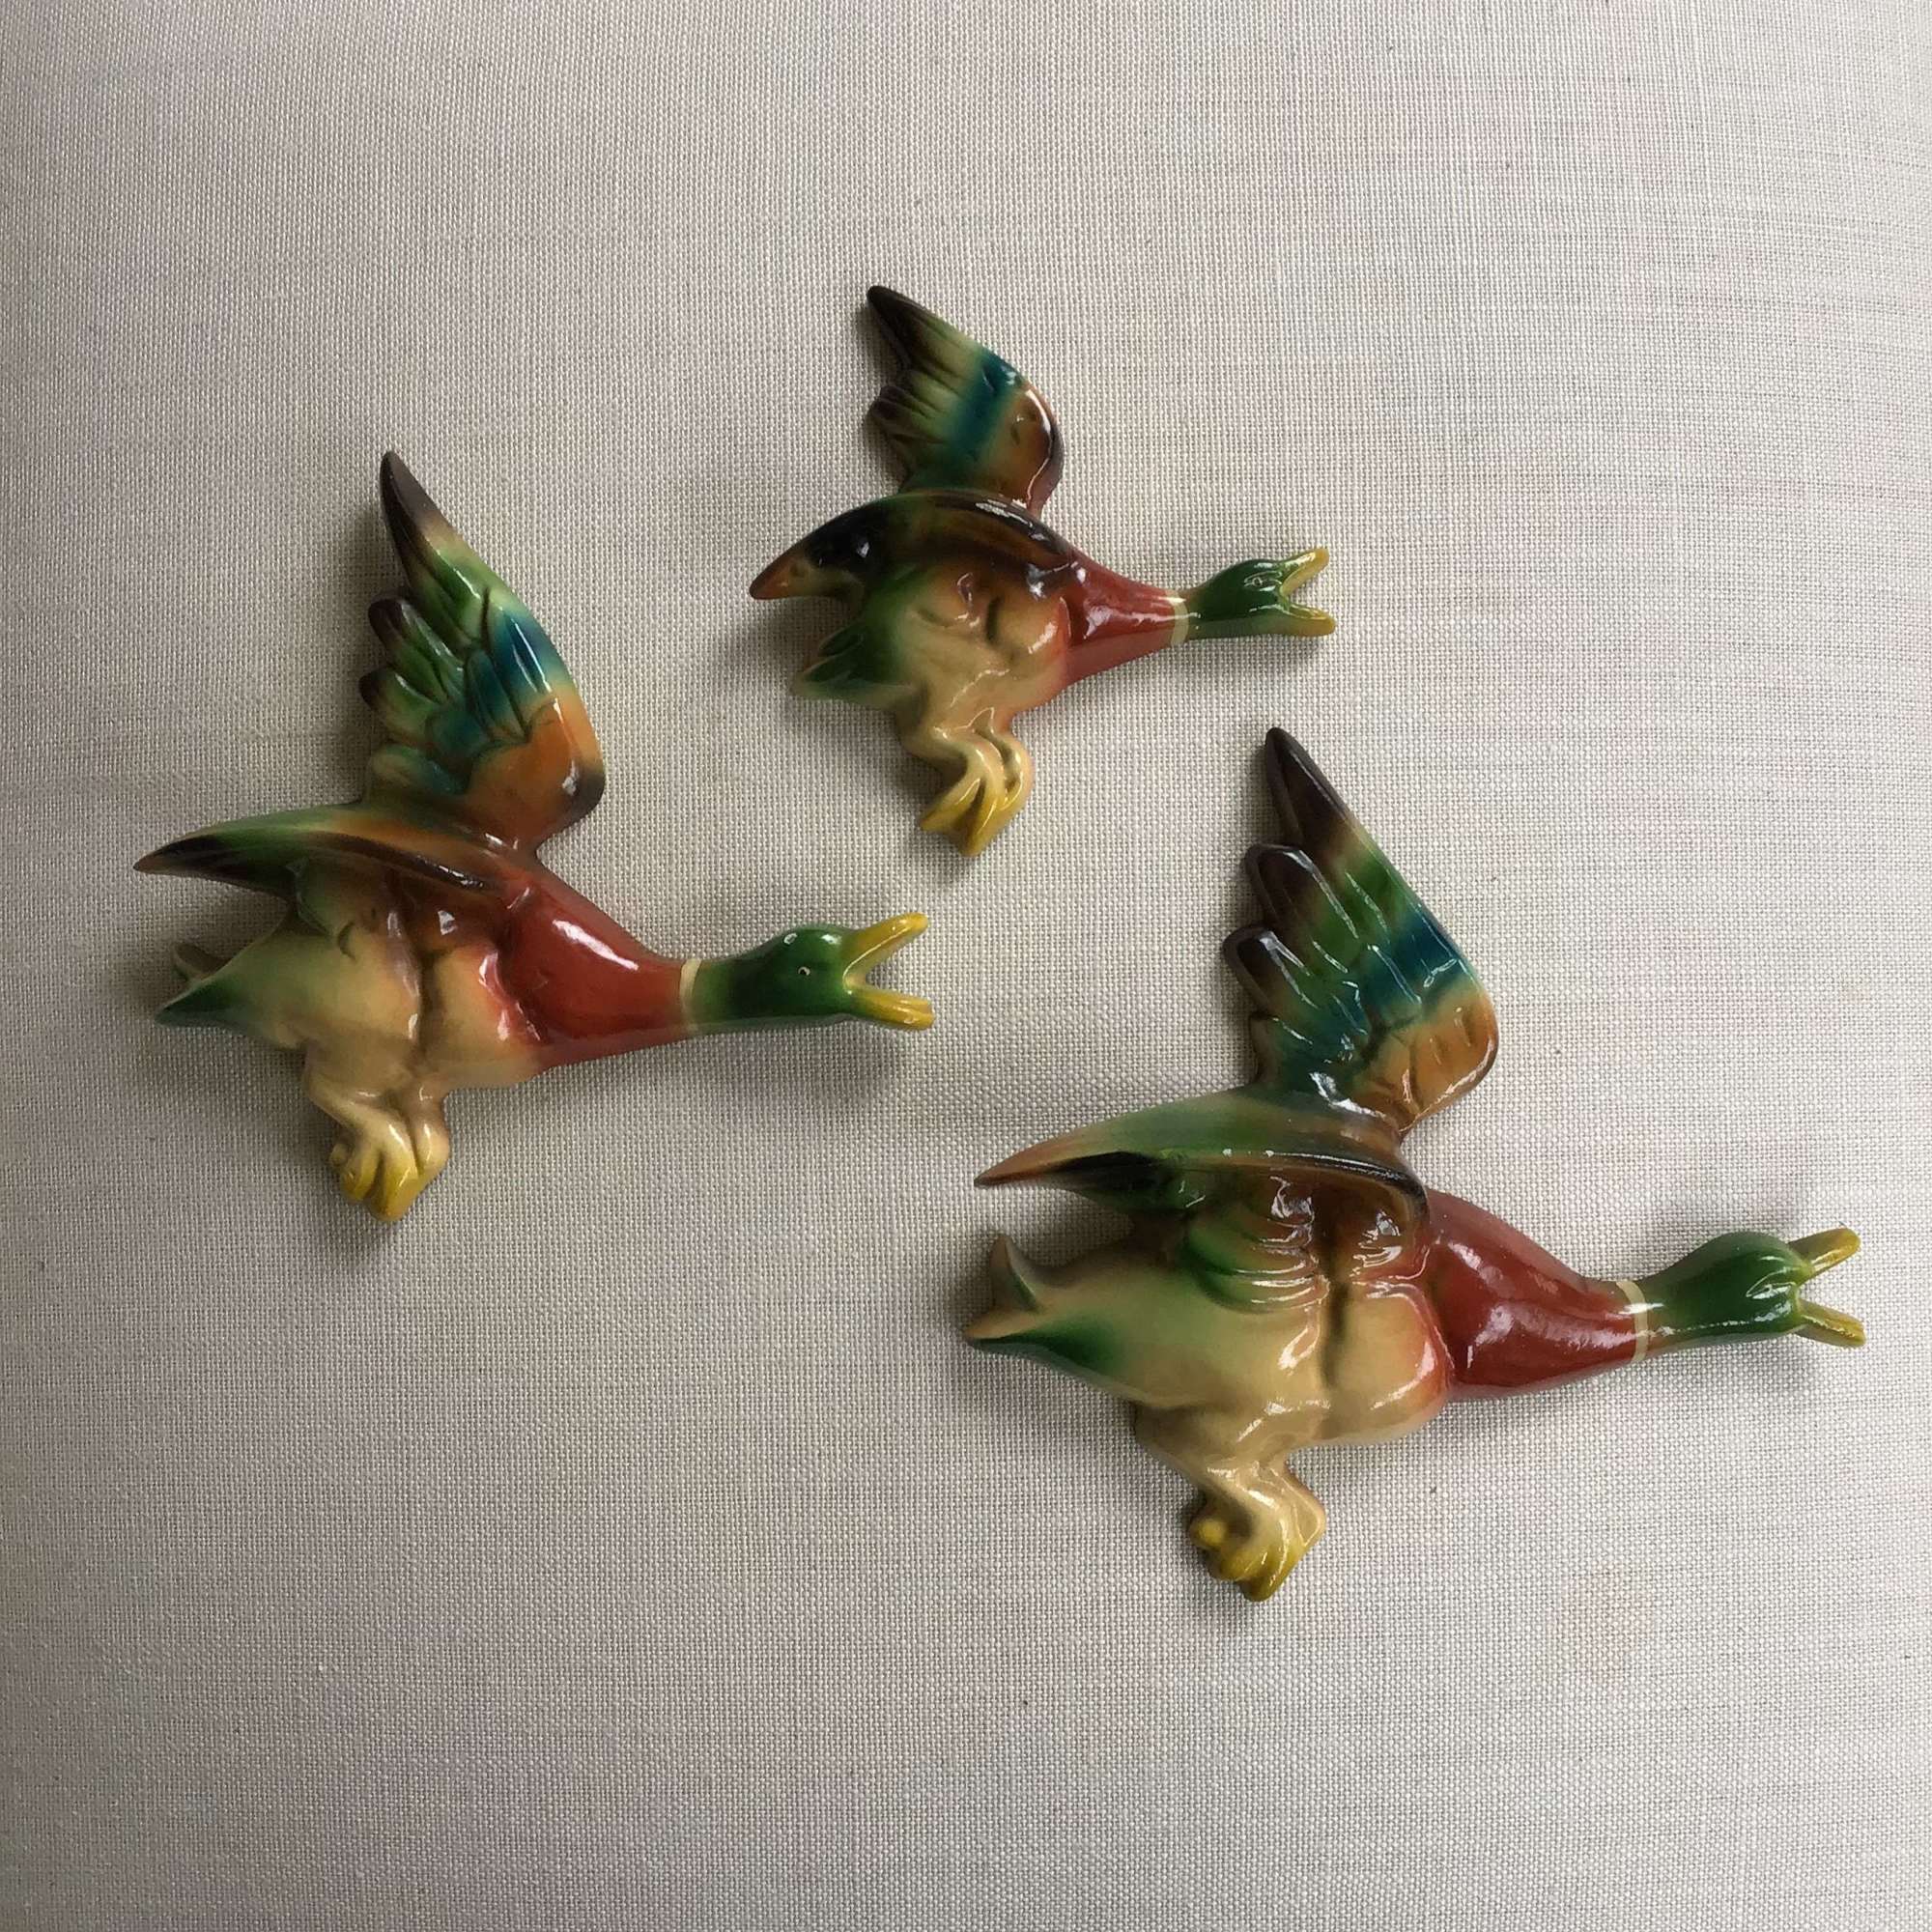 Vintage 1940s set of three flying ducks by Parkside